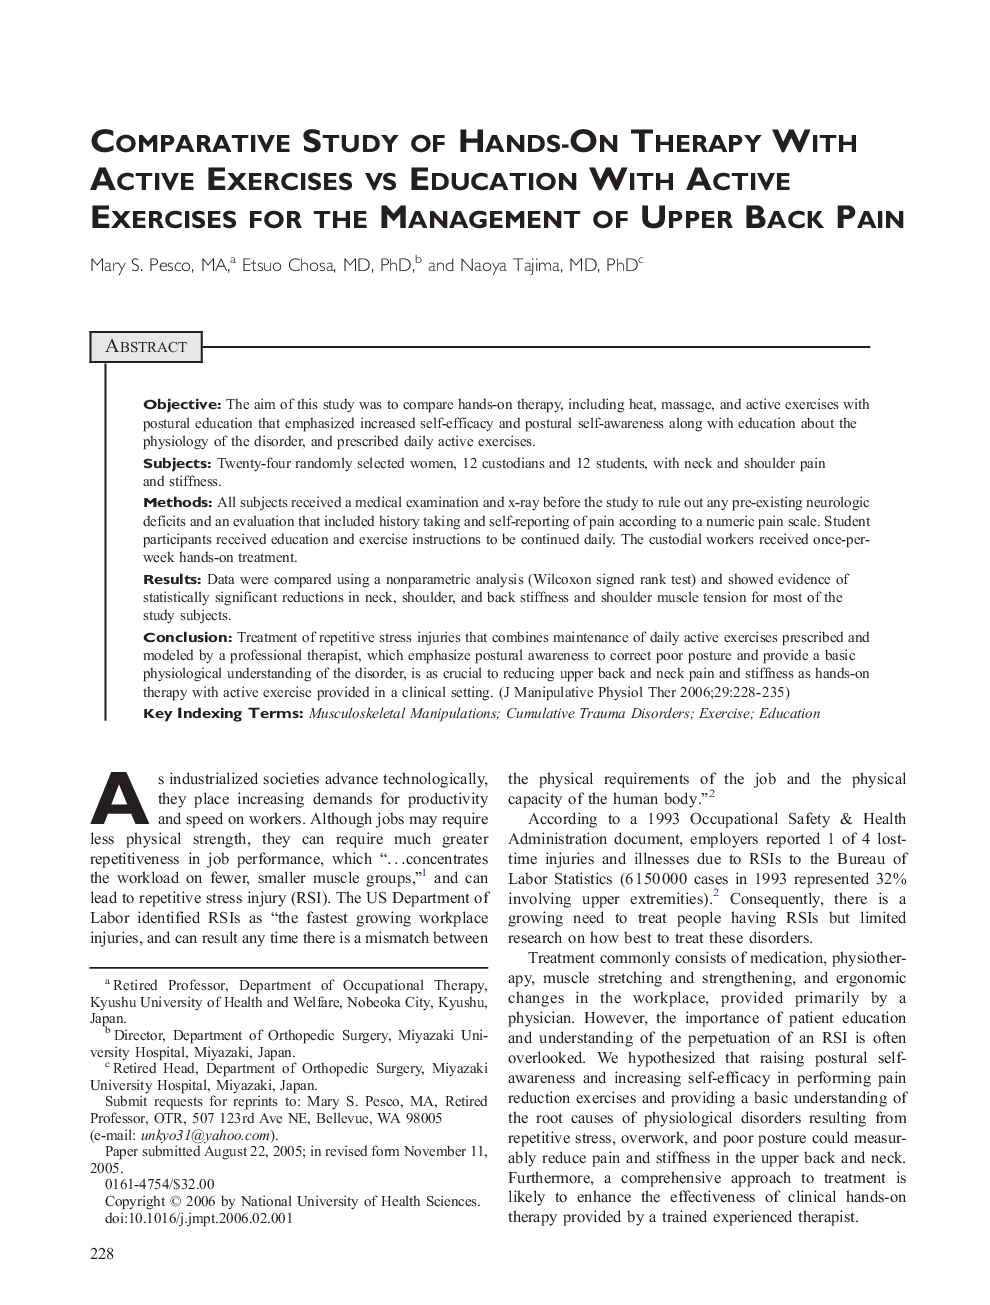 Comparative Study of Hands-On Therapy With Active Exercises vs Education With Active Exercises for the Management of Upper Back Pain